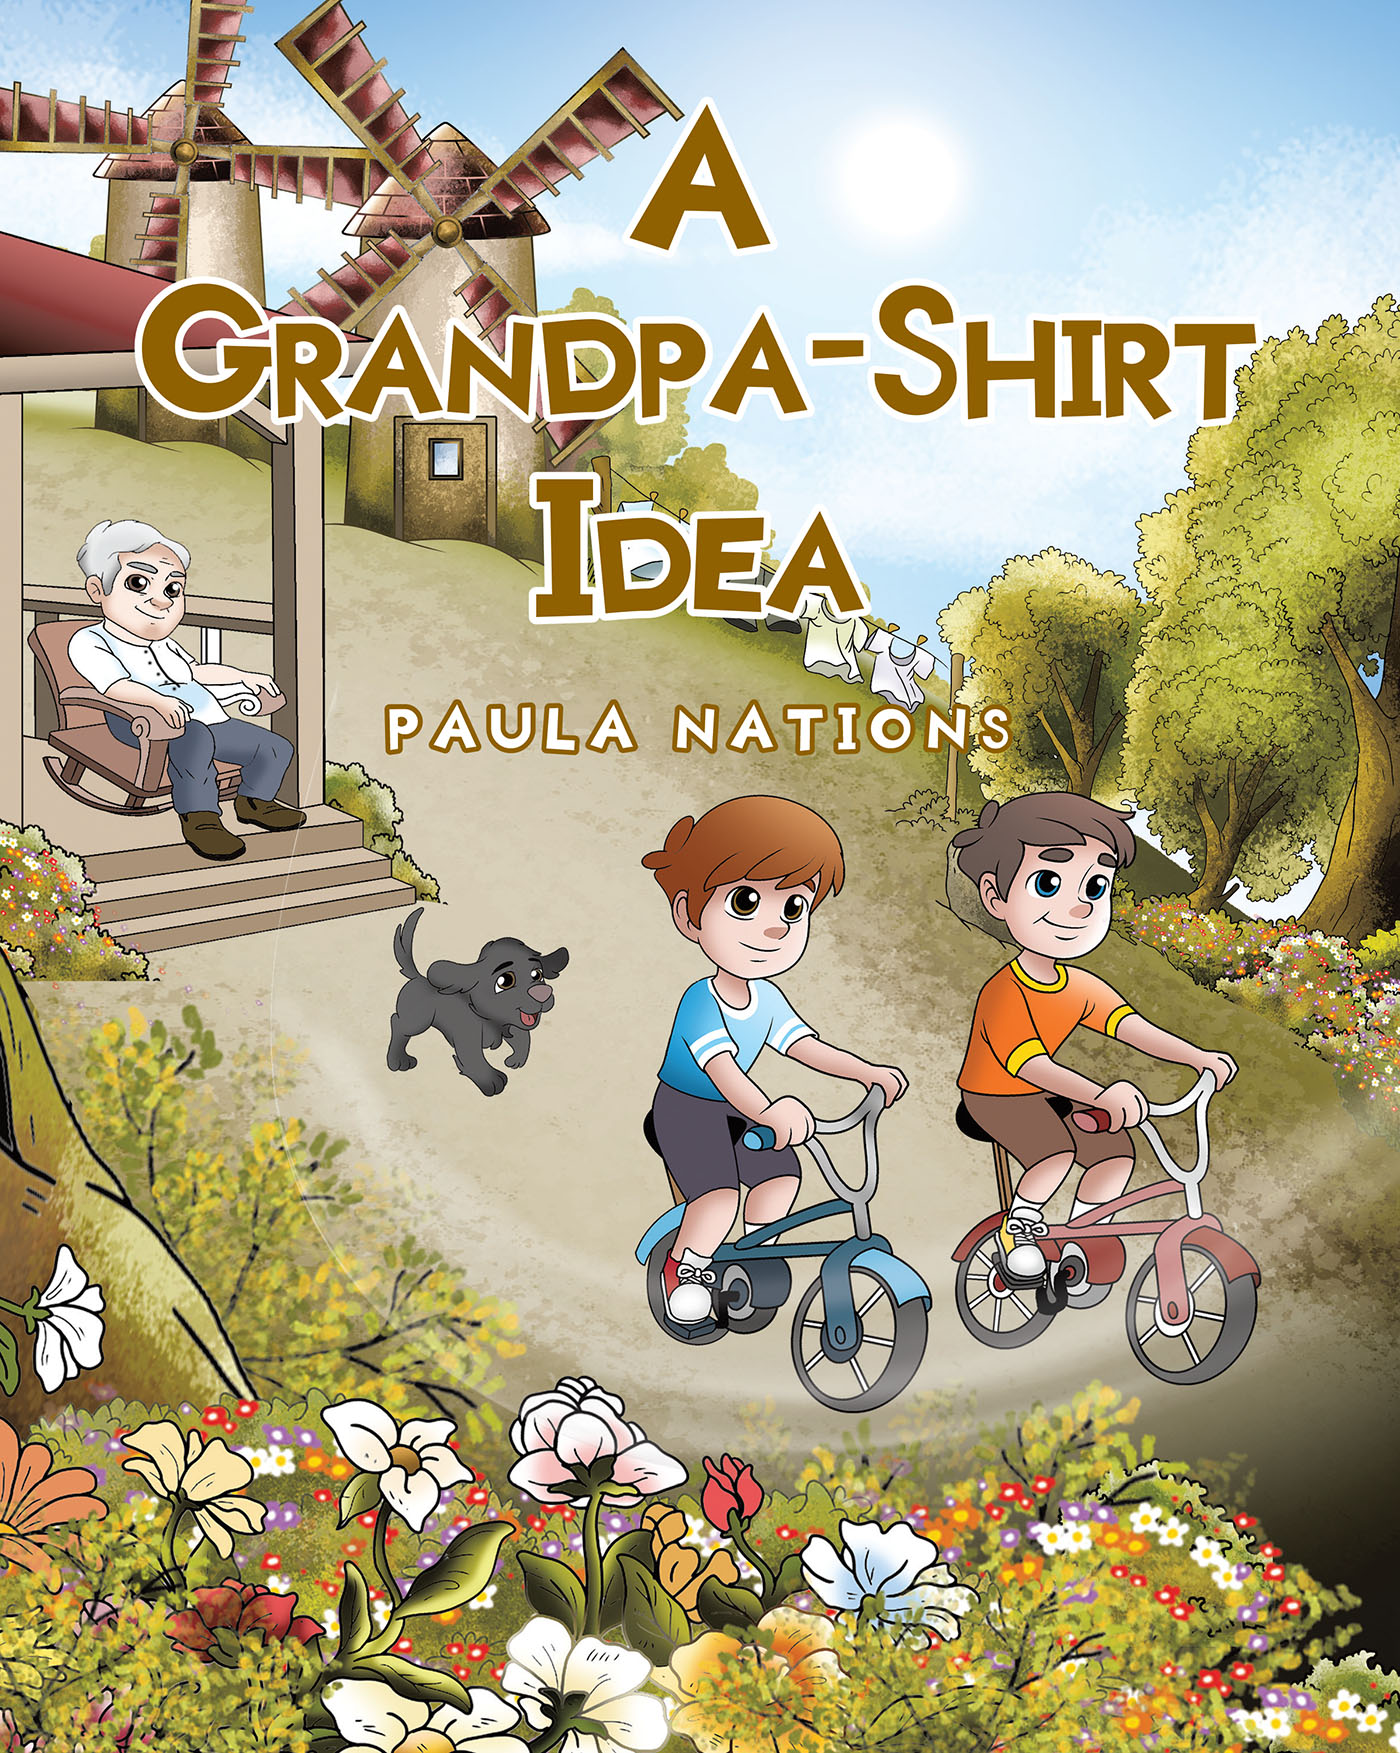 Paula Nations’s Newly Released "A Grandpa-Shirt Idea" is a Fun and Lighthearted Children’s Tale of Youthful Adventure